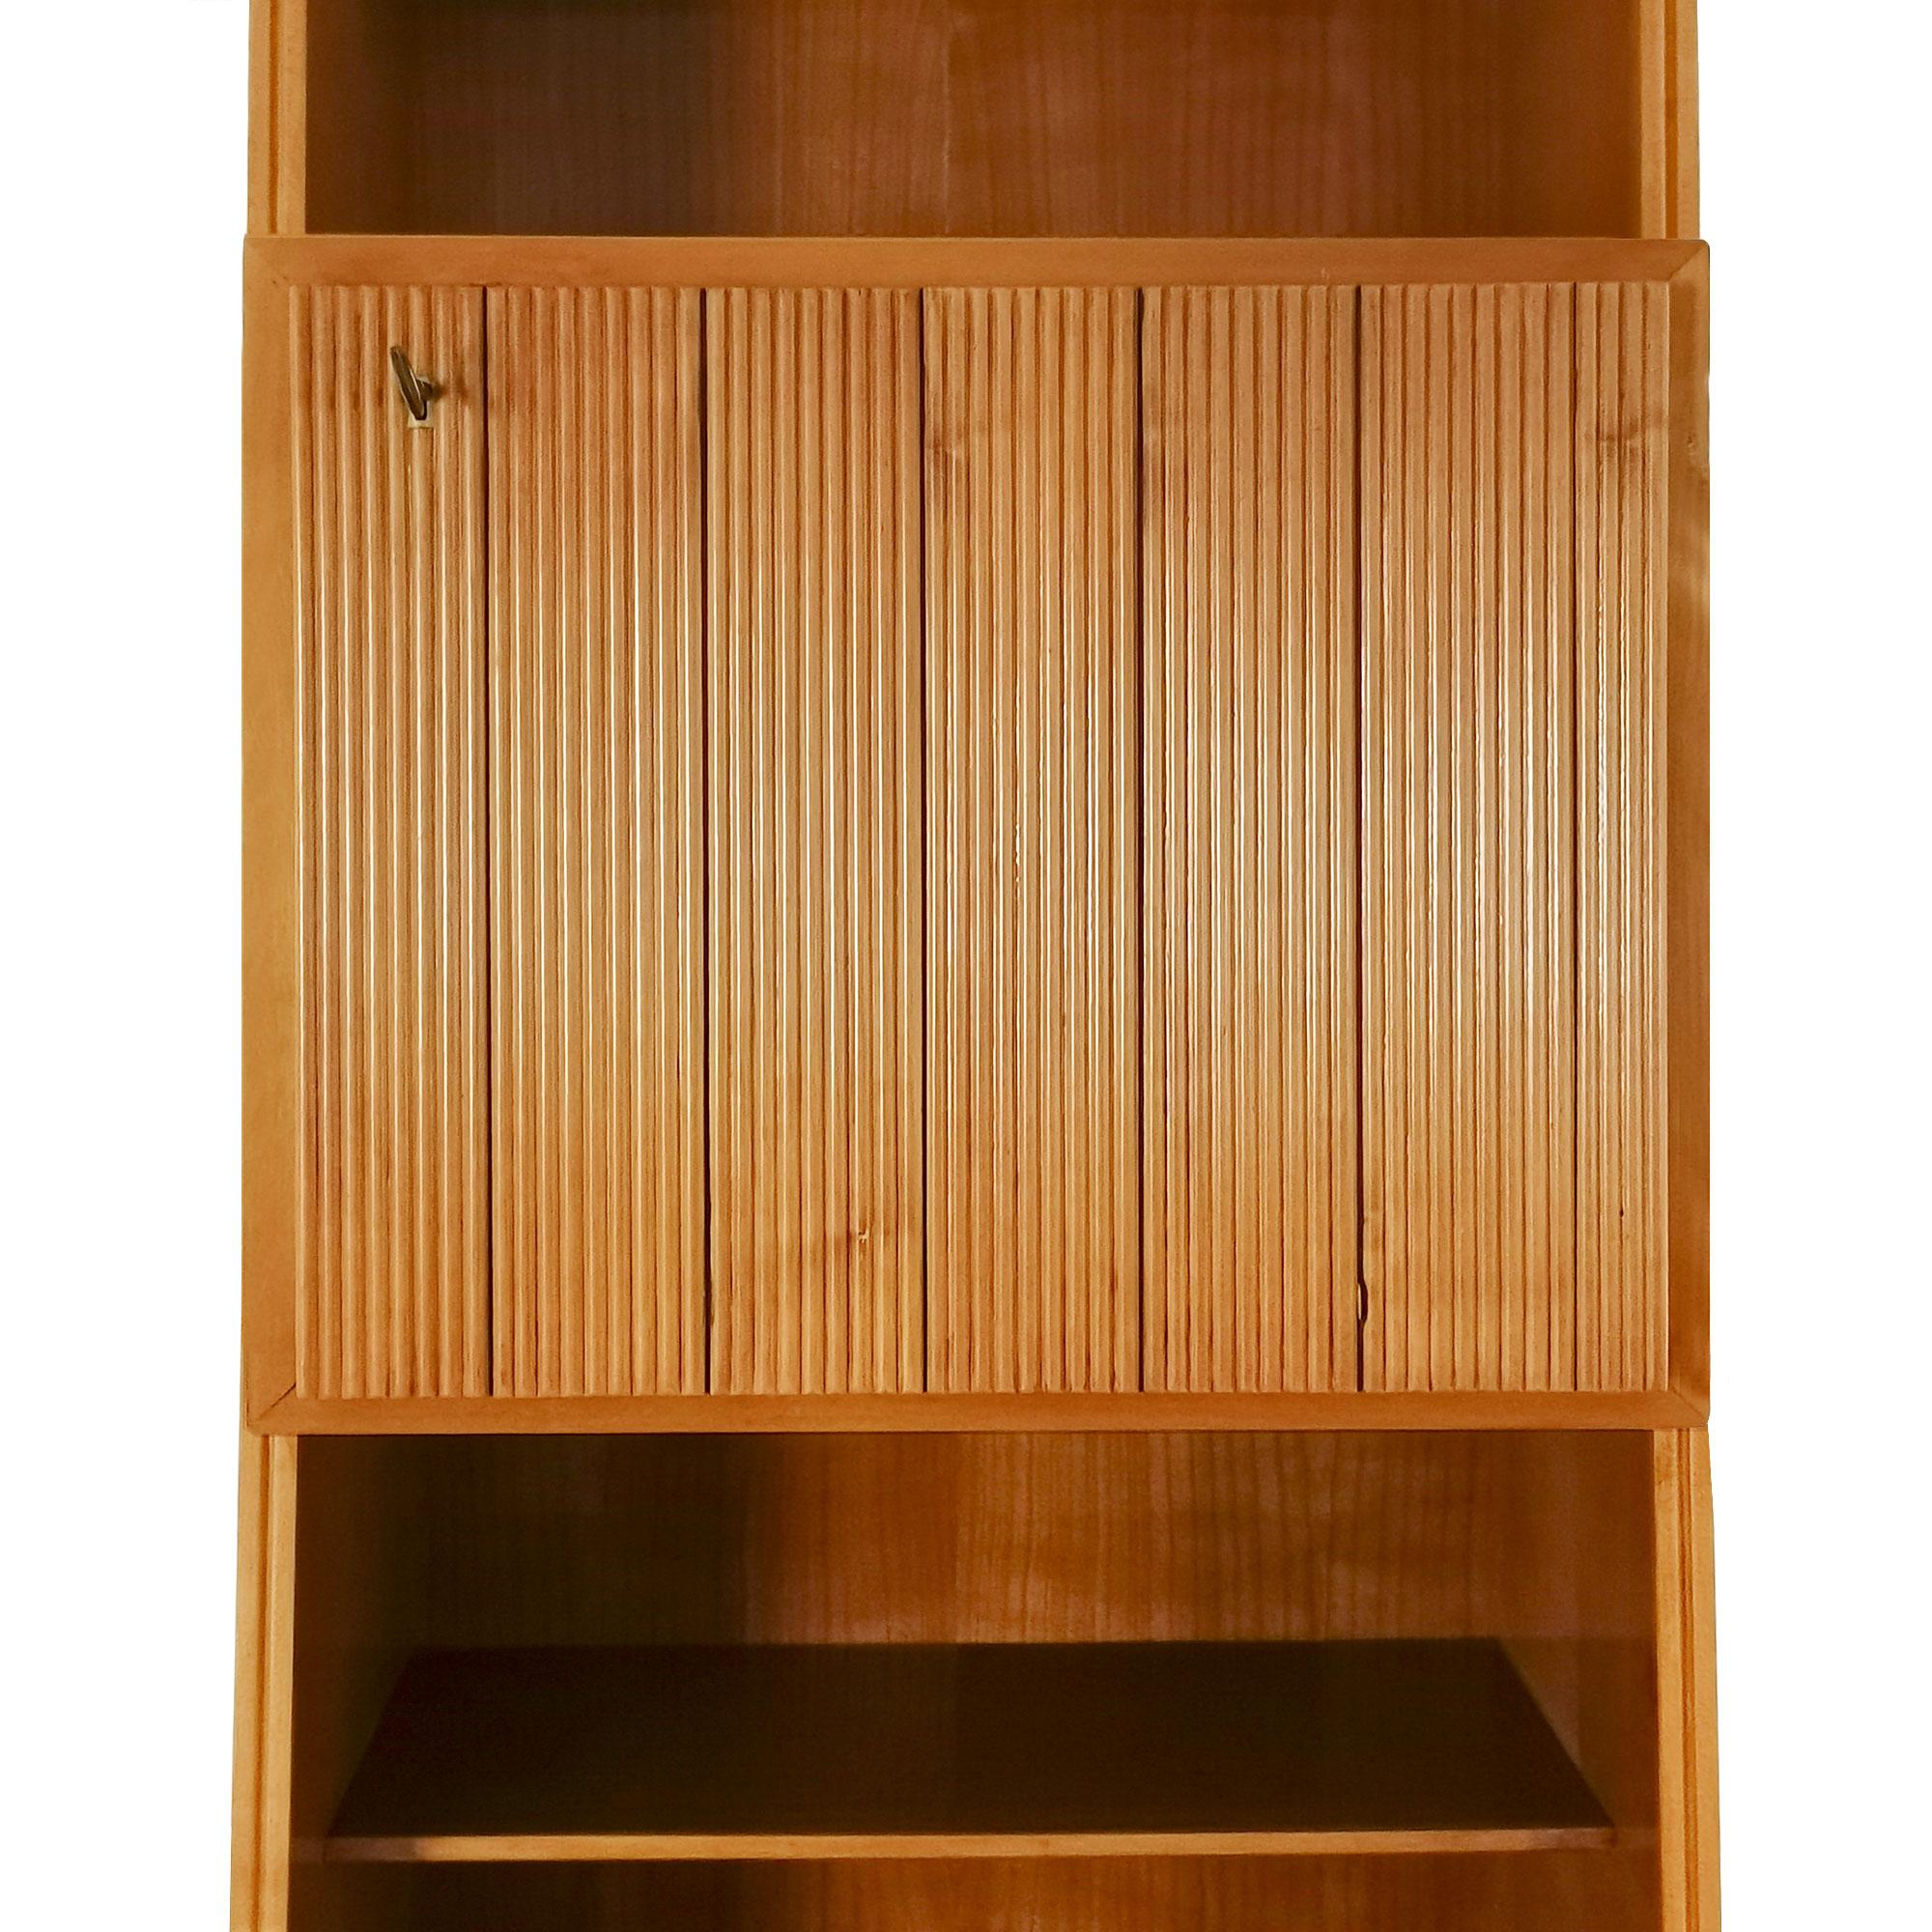 Mid-Century Modern Cherry Wood Bookcase With Shelves and Two Doors - Italy For Sale 2